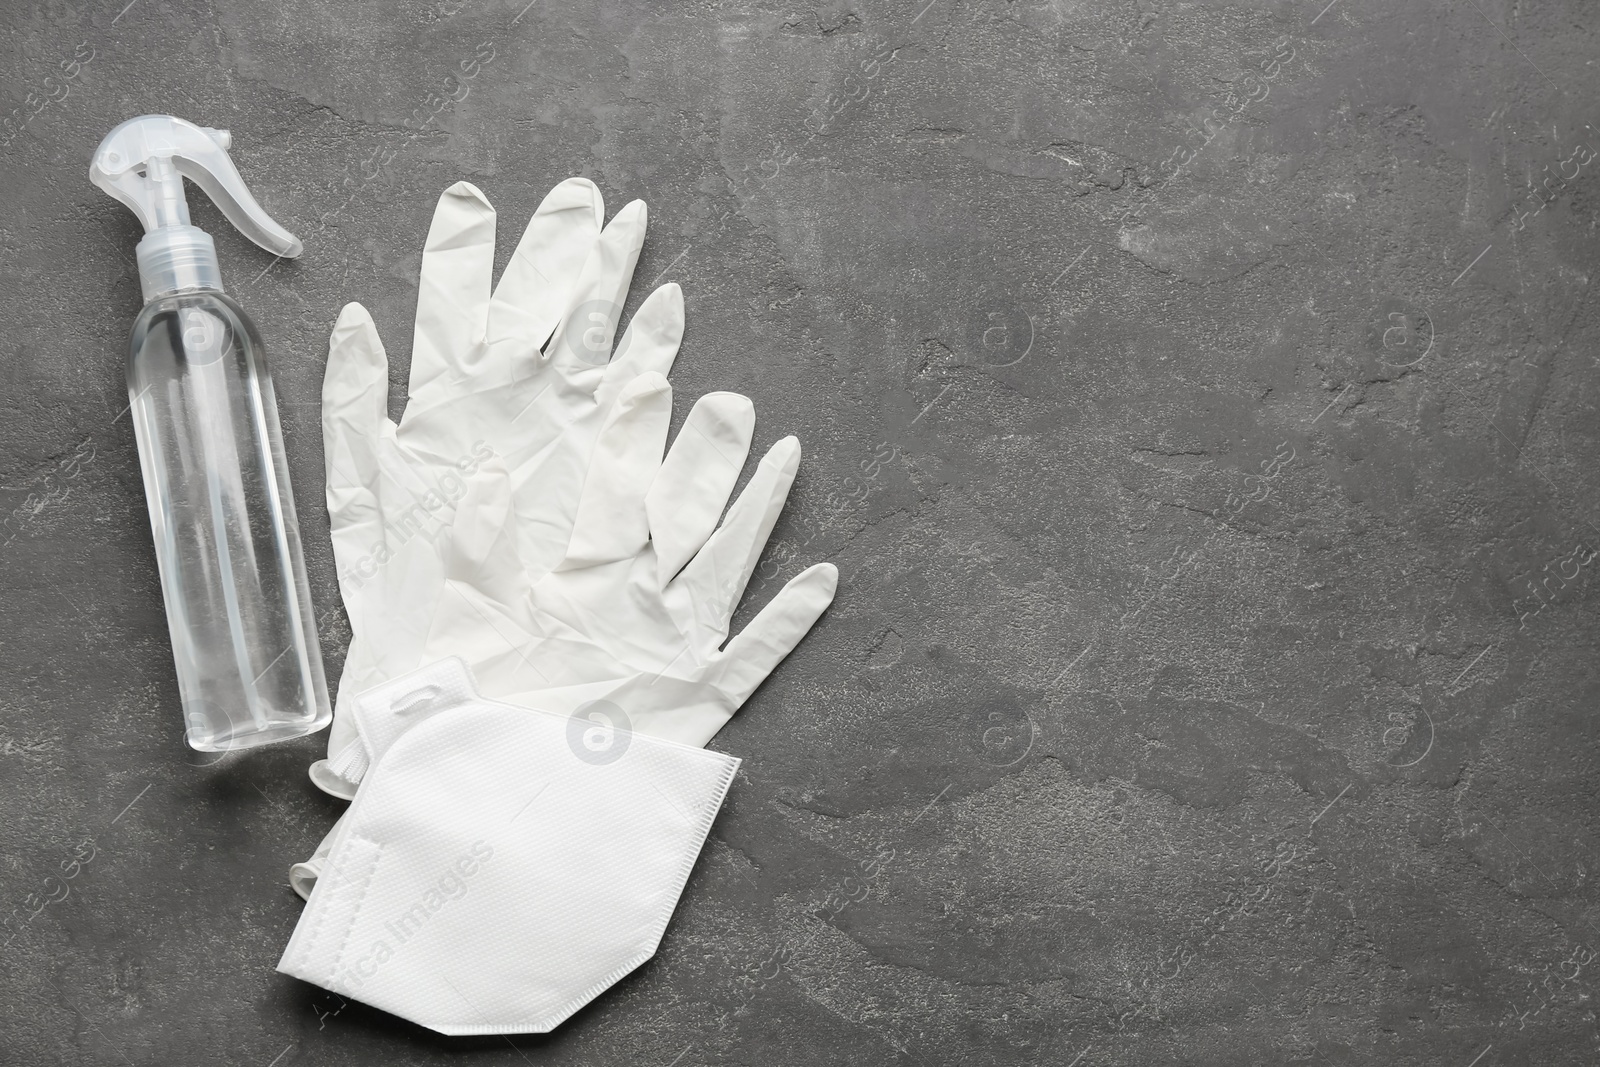 Photo of Medical gloves, protective mask and hand sanitizer on grey background, flat lay. Space for text